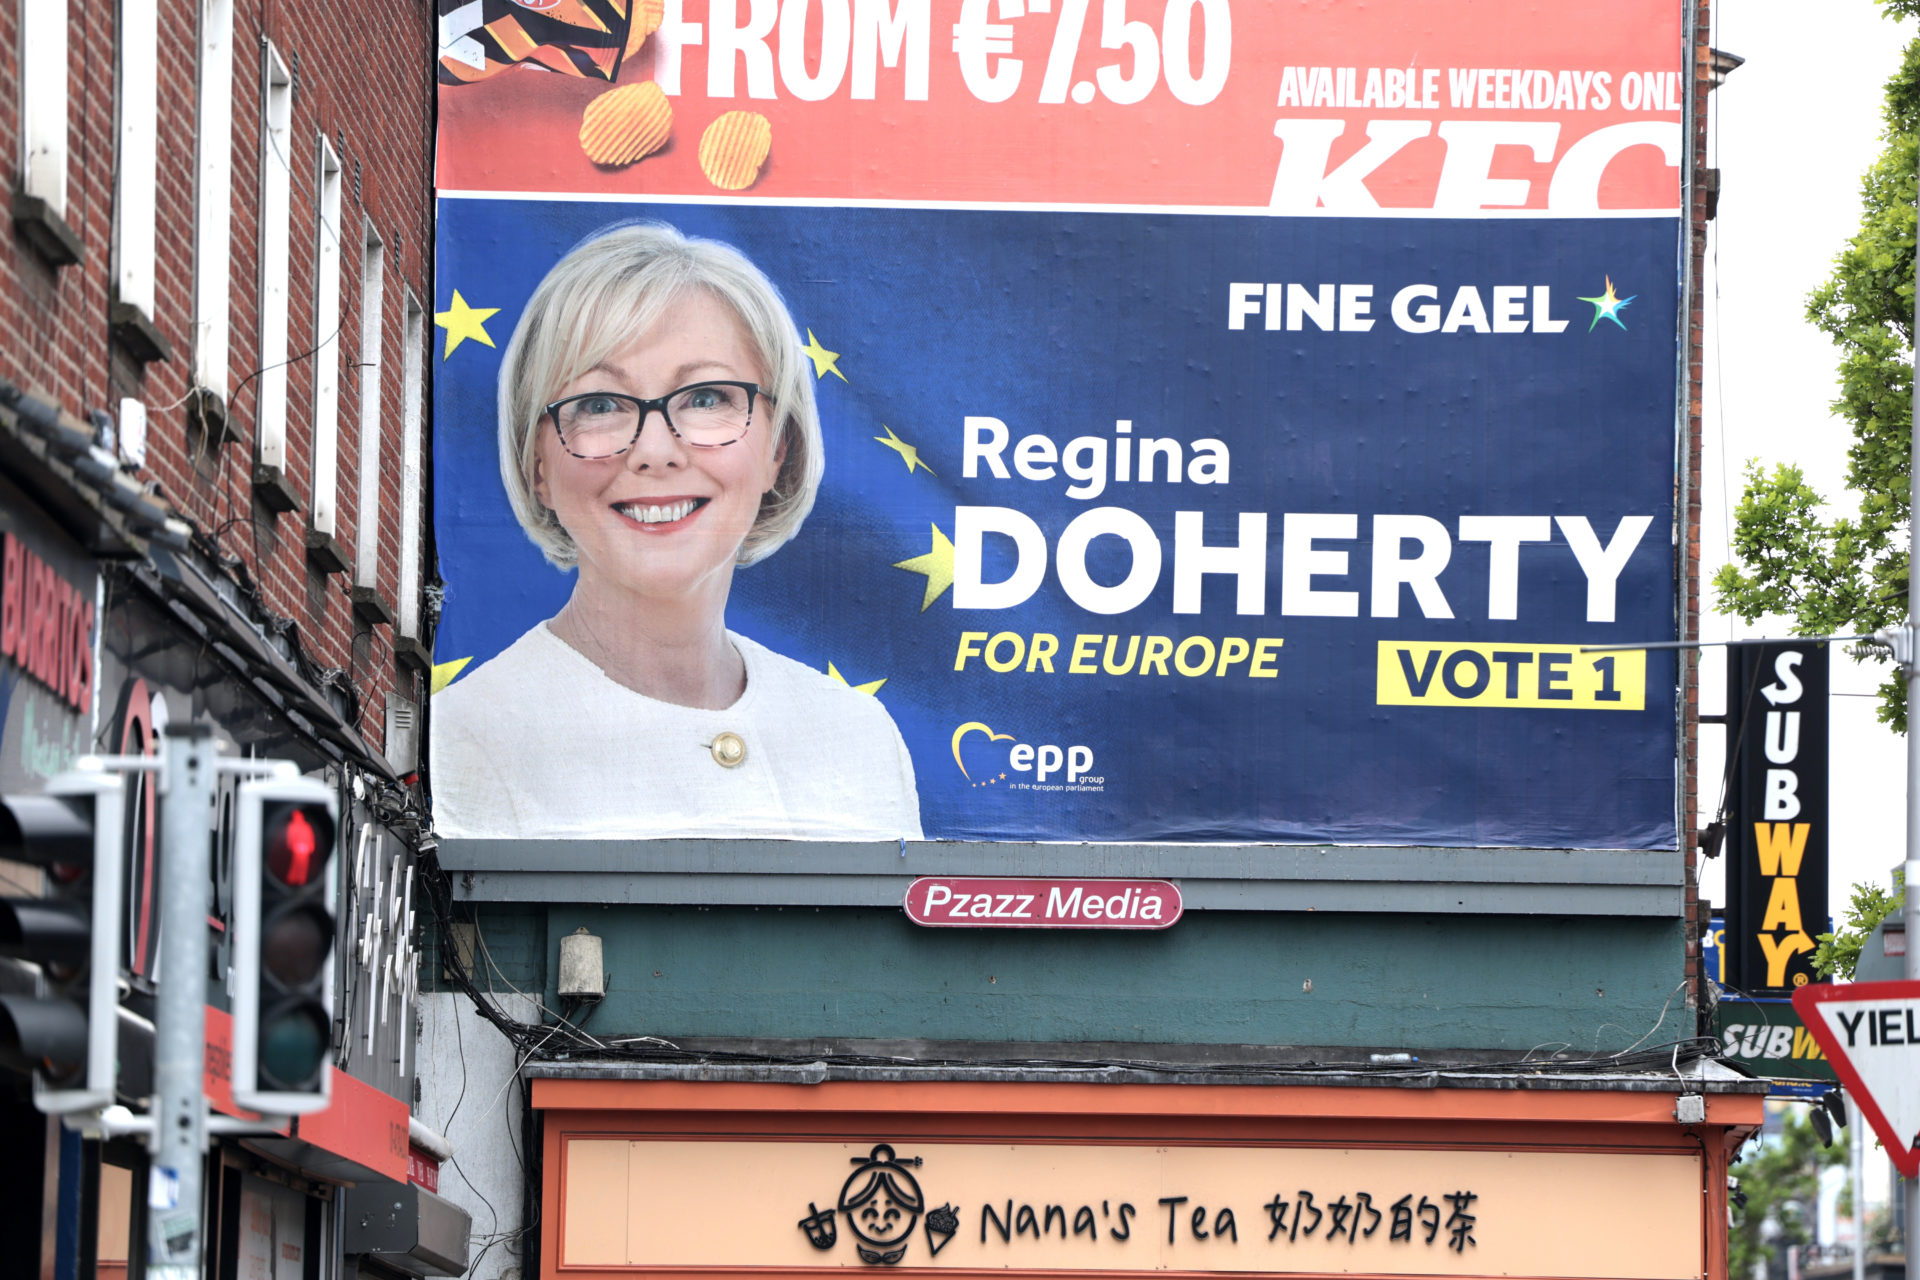 A poster for Fine Gael Regina Doherty's European election campaign on Dublin's Wexford Street.